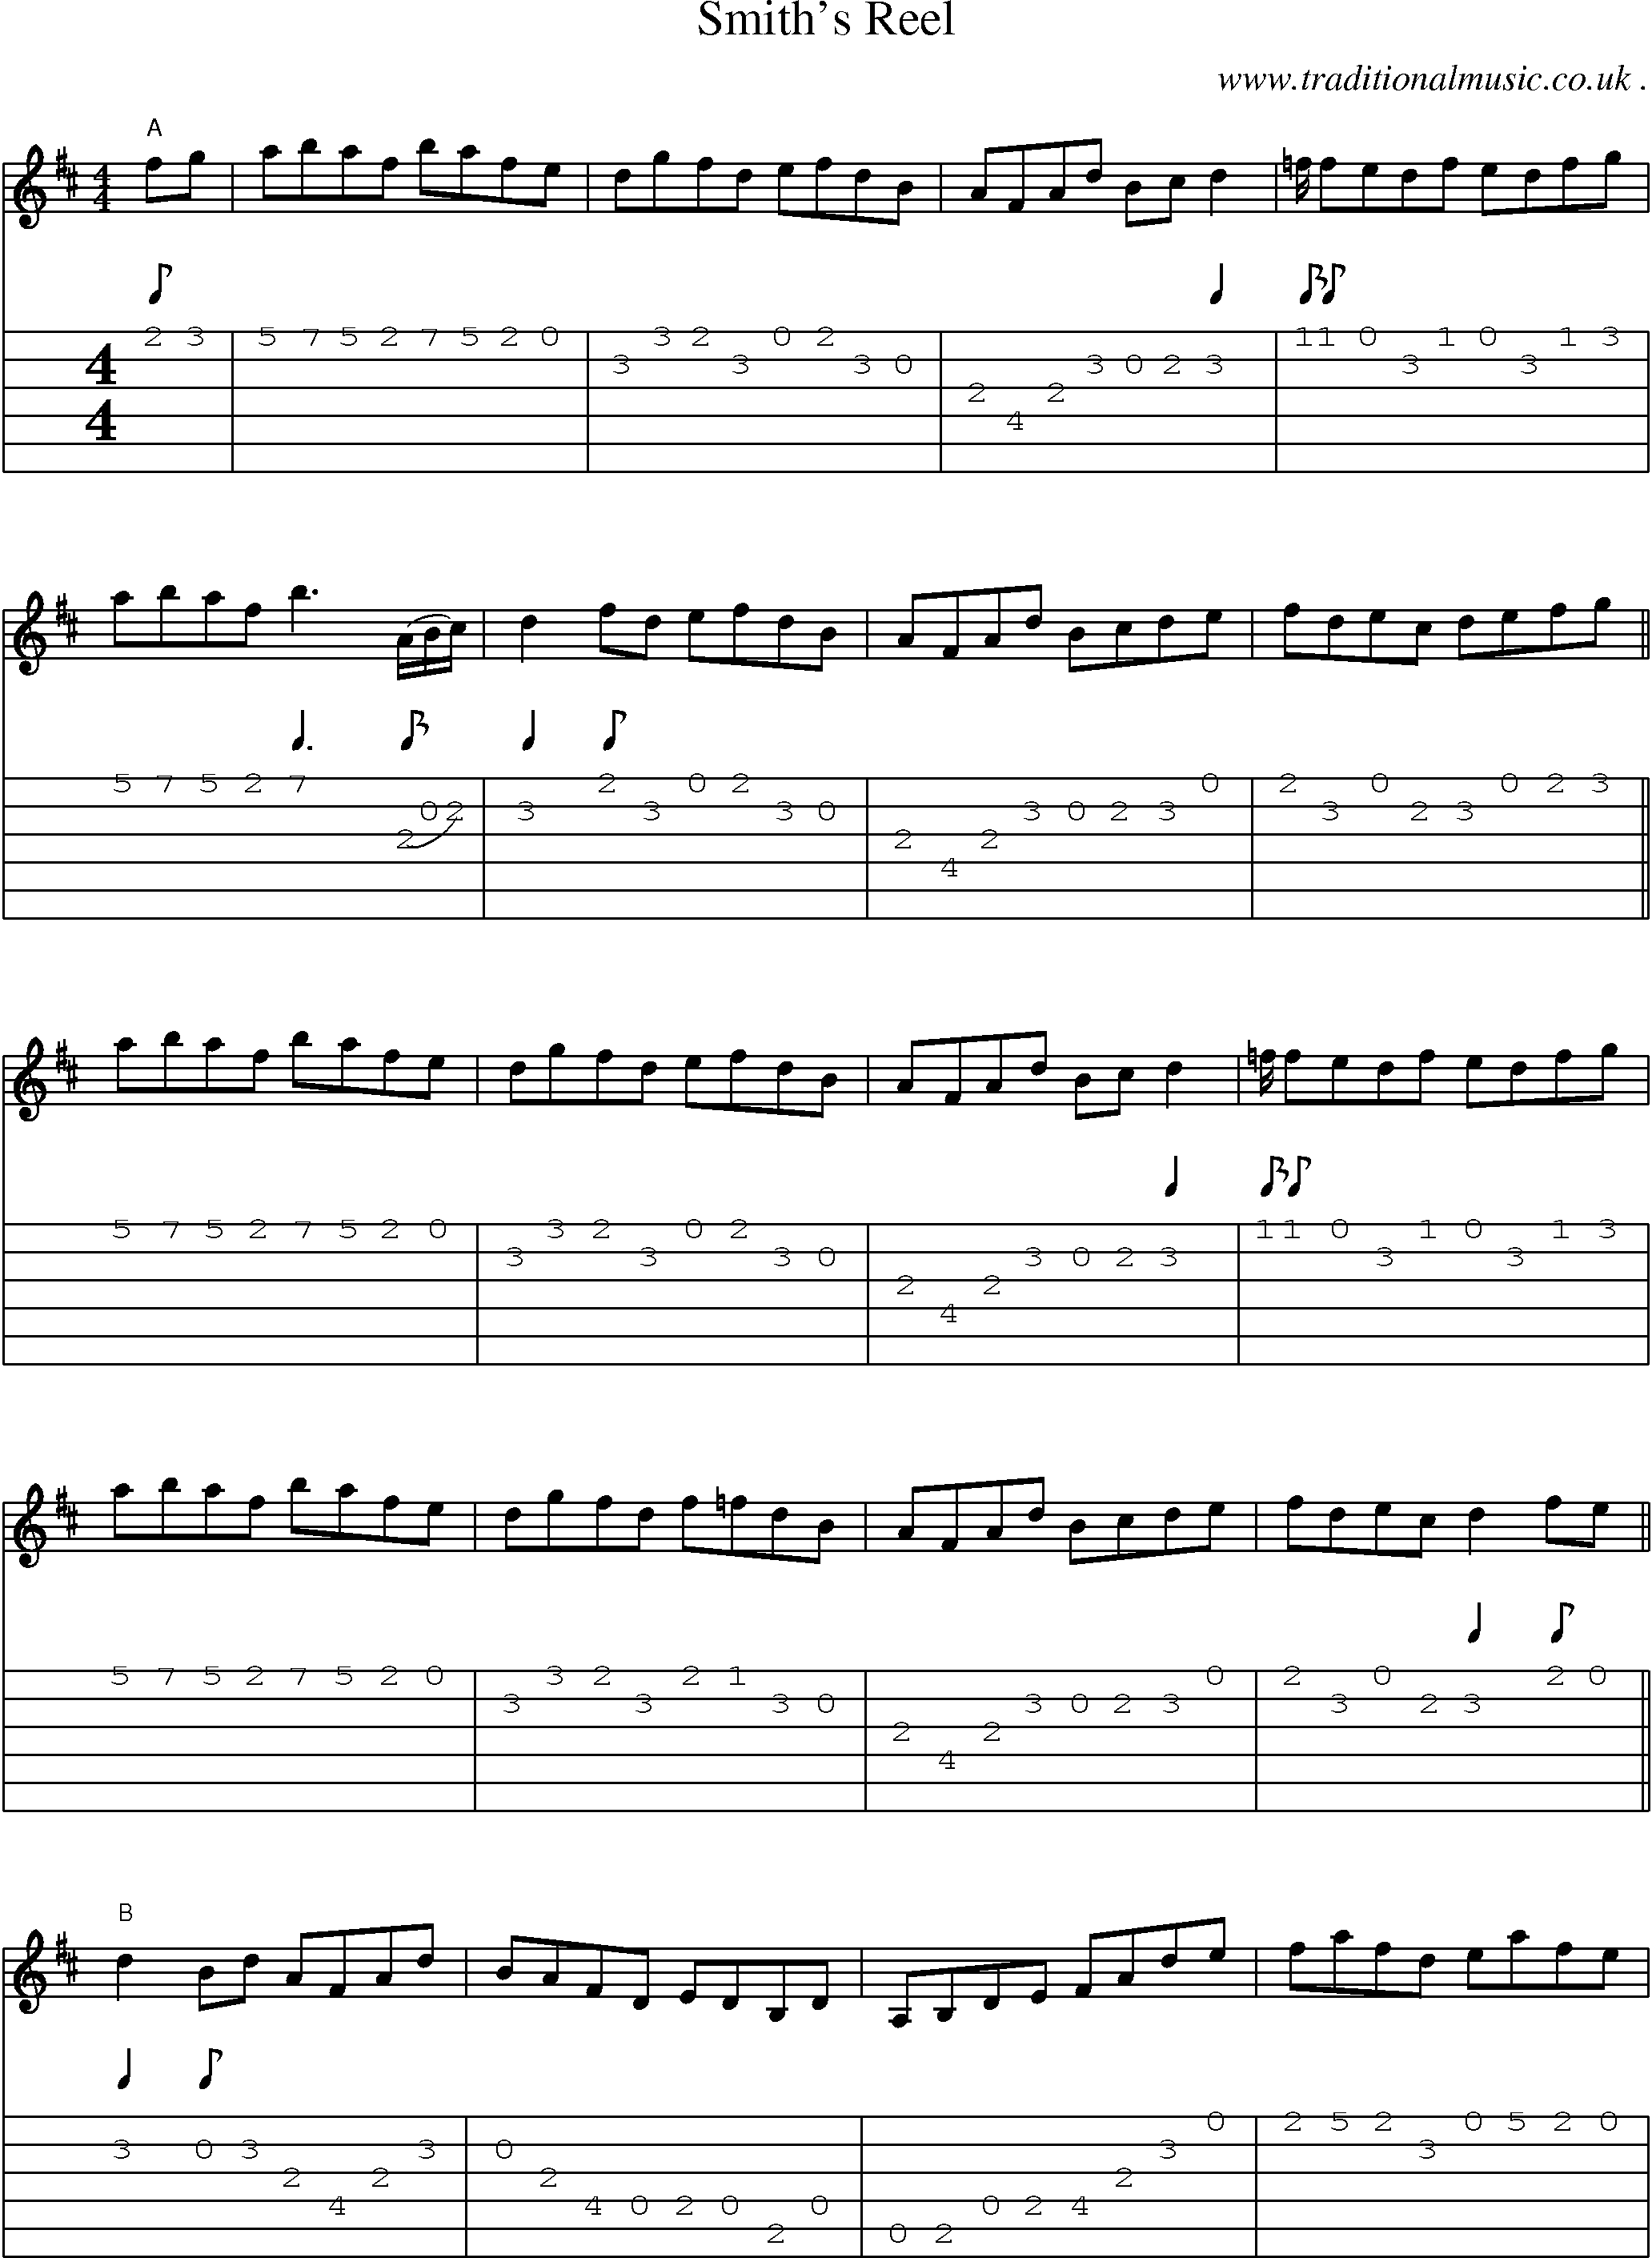 Music Score and Guitar Tabs for Smiths Reel